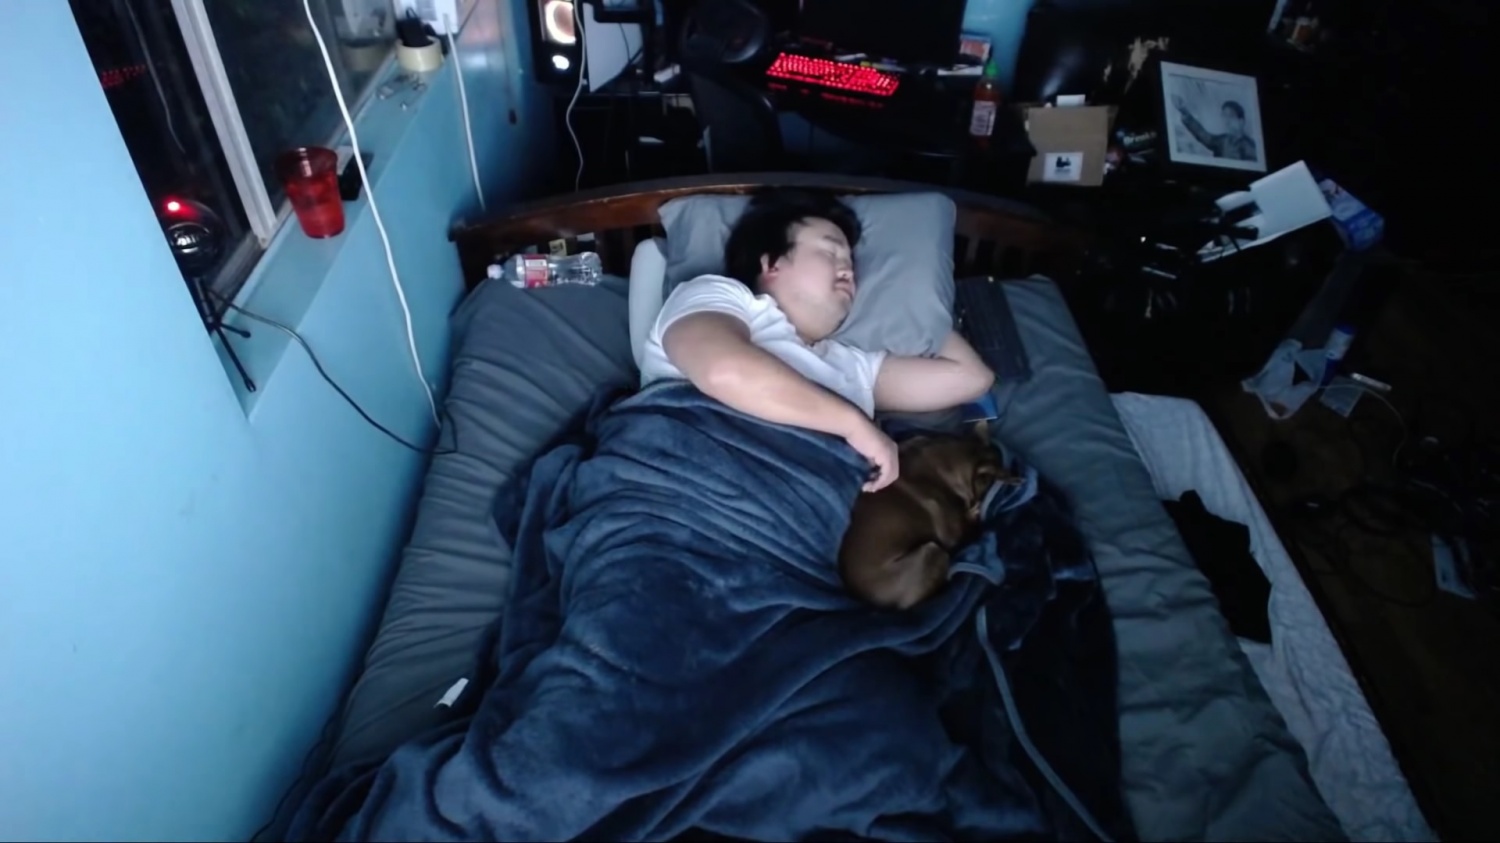 Twitch Streamer Asian Andy Earns $16,000 Through Sleeping for 7 Hours!